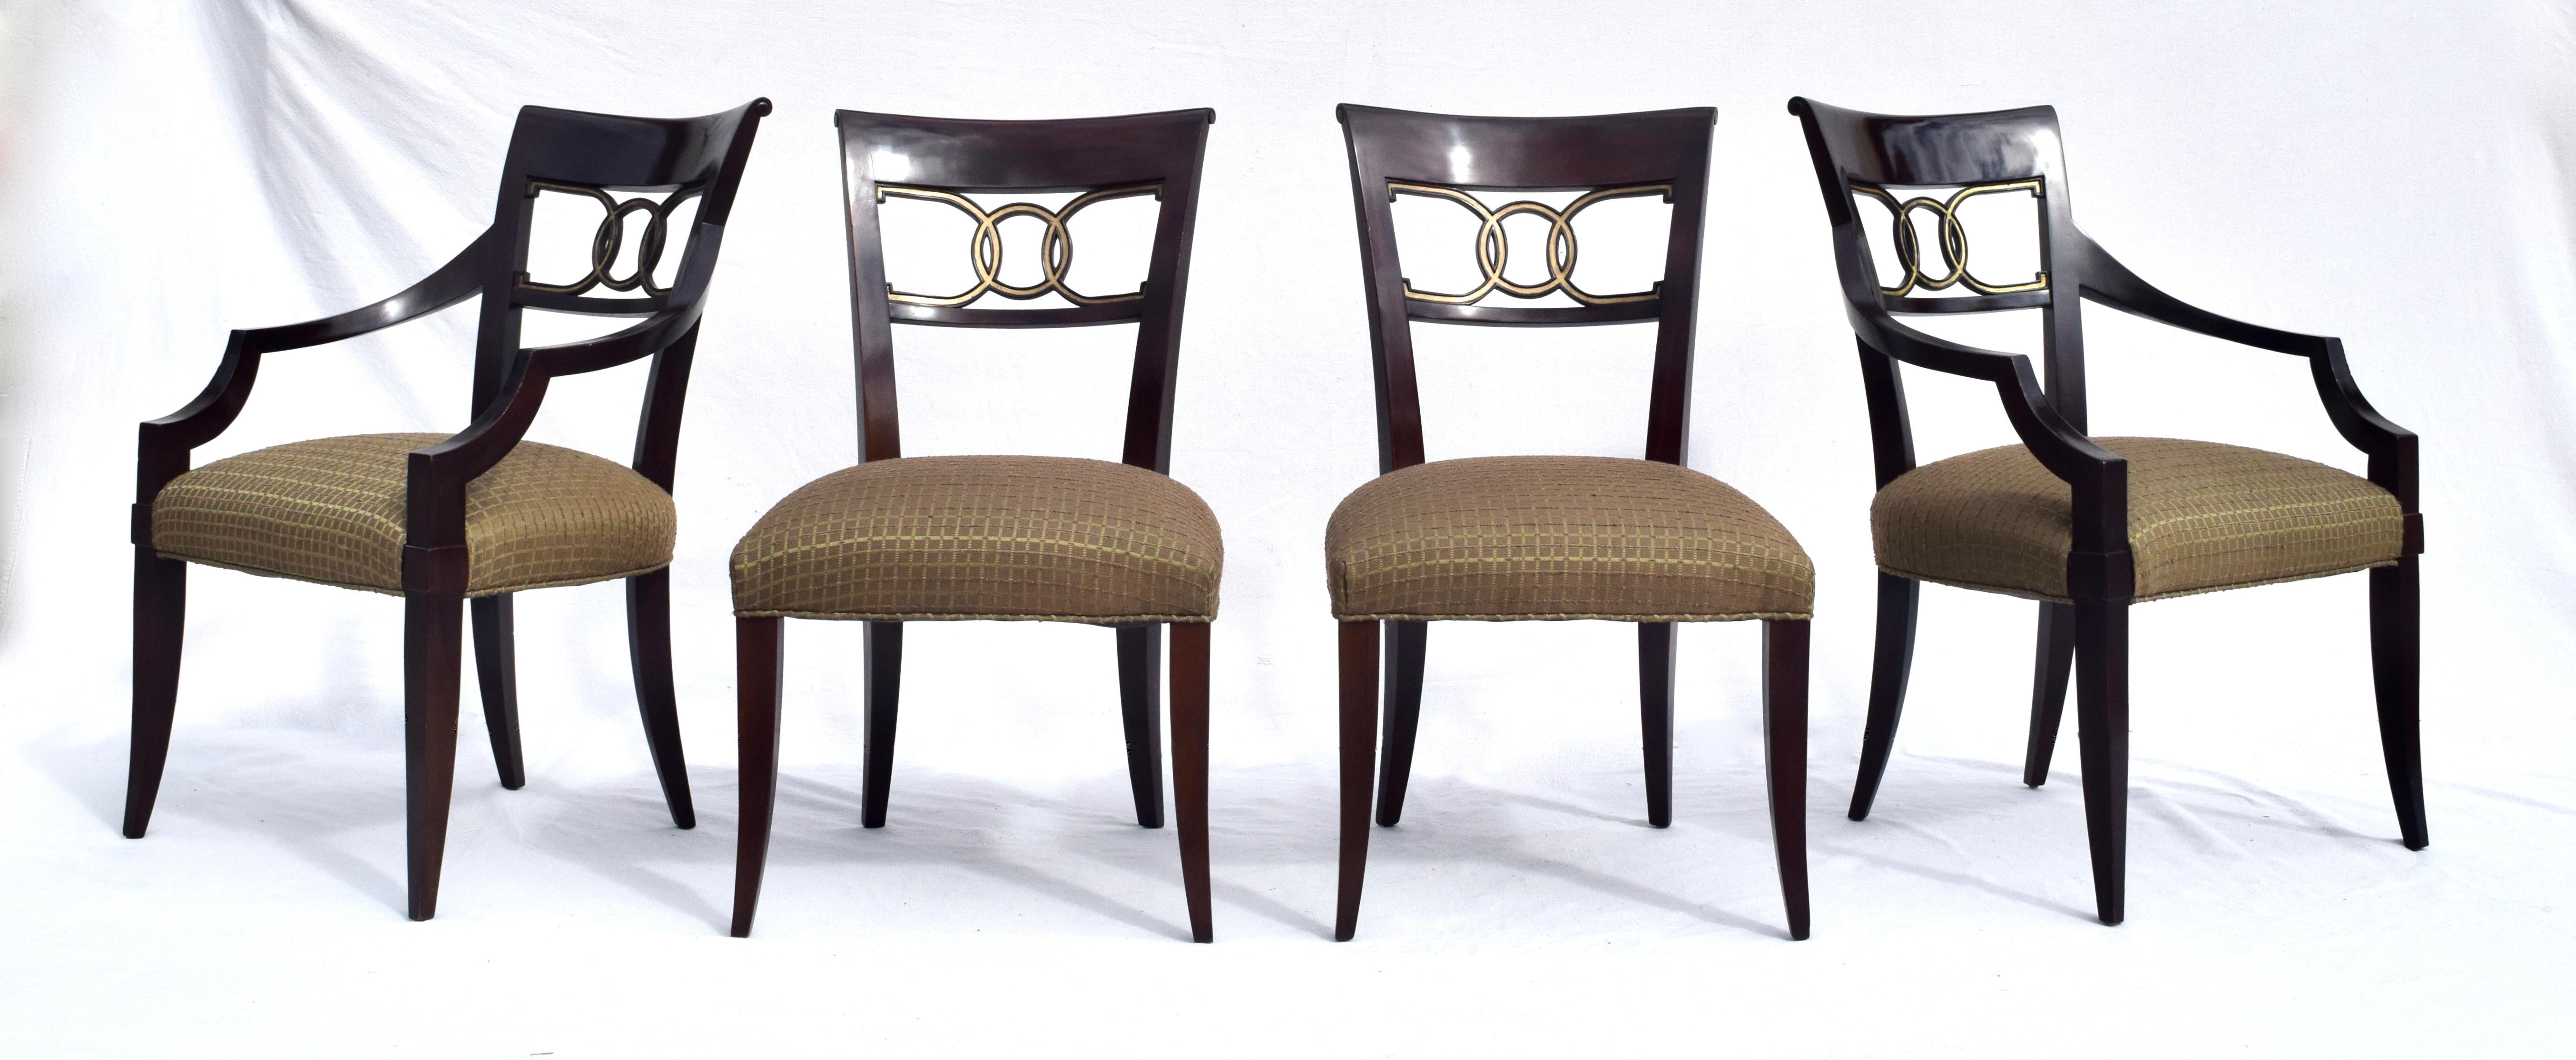 An exceptional set of Thomas Pheasant for Baker Cleo dining chairs set of twelve consisting of two arm chairs & ten side chairs. Upholstery & original finish have been beautifully maintained the set being used for holidays only for over two decades.